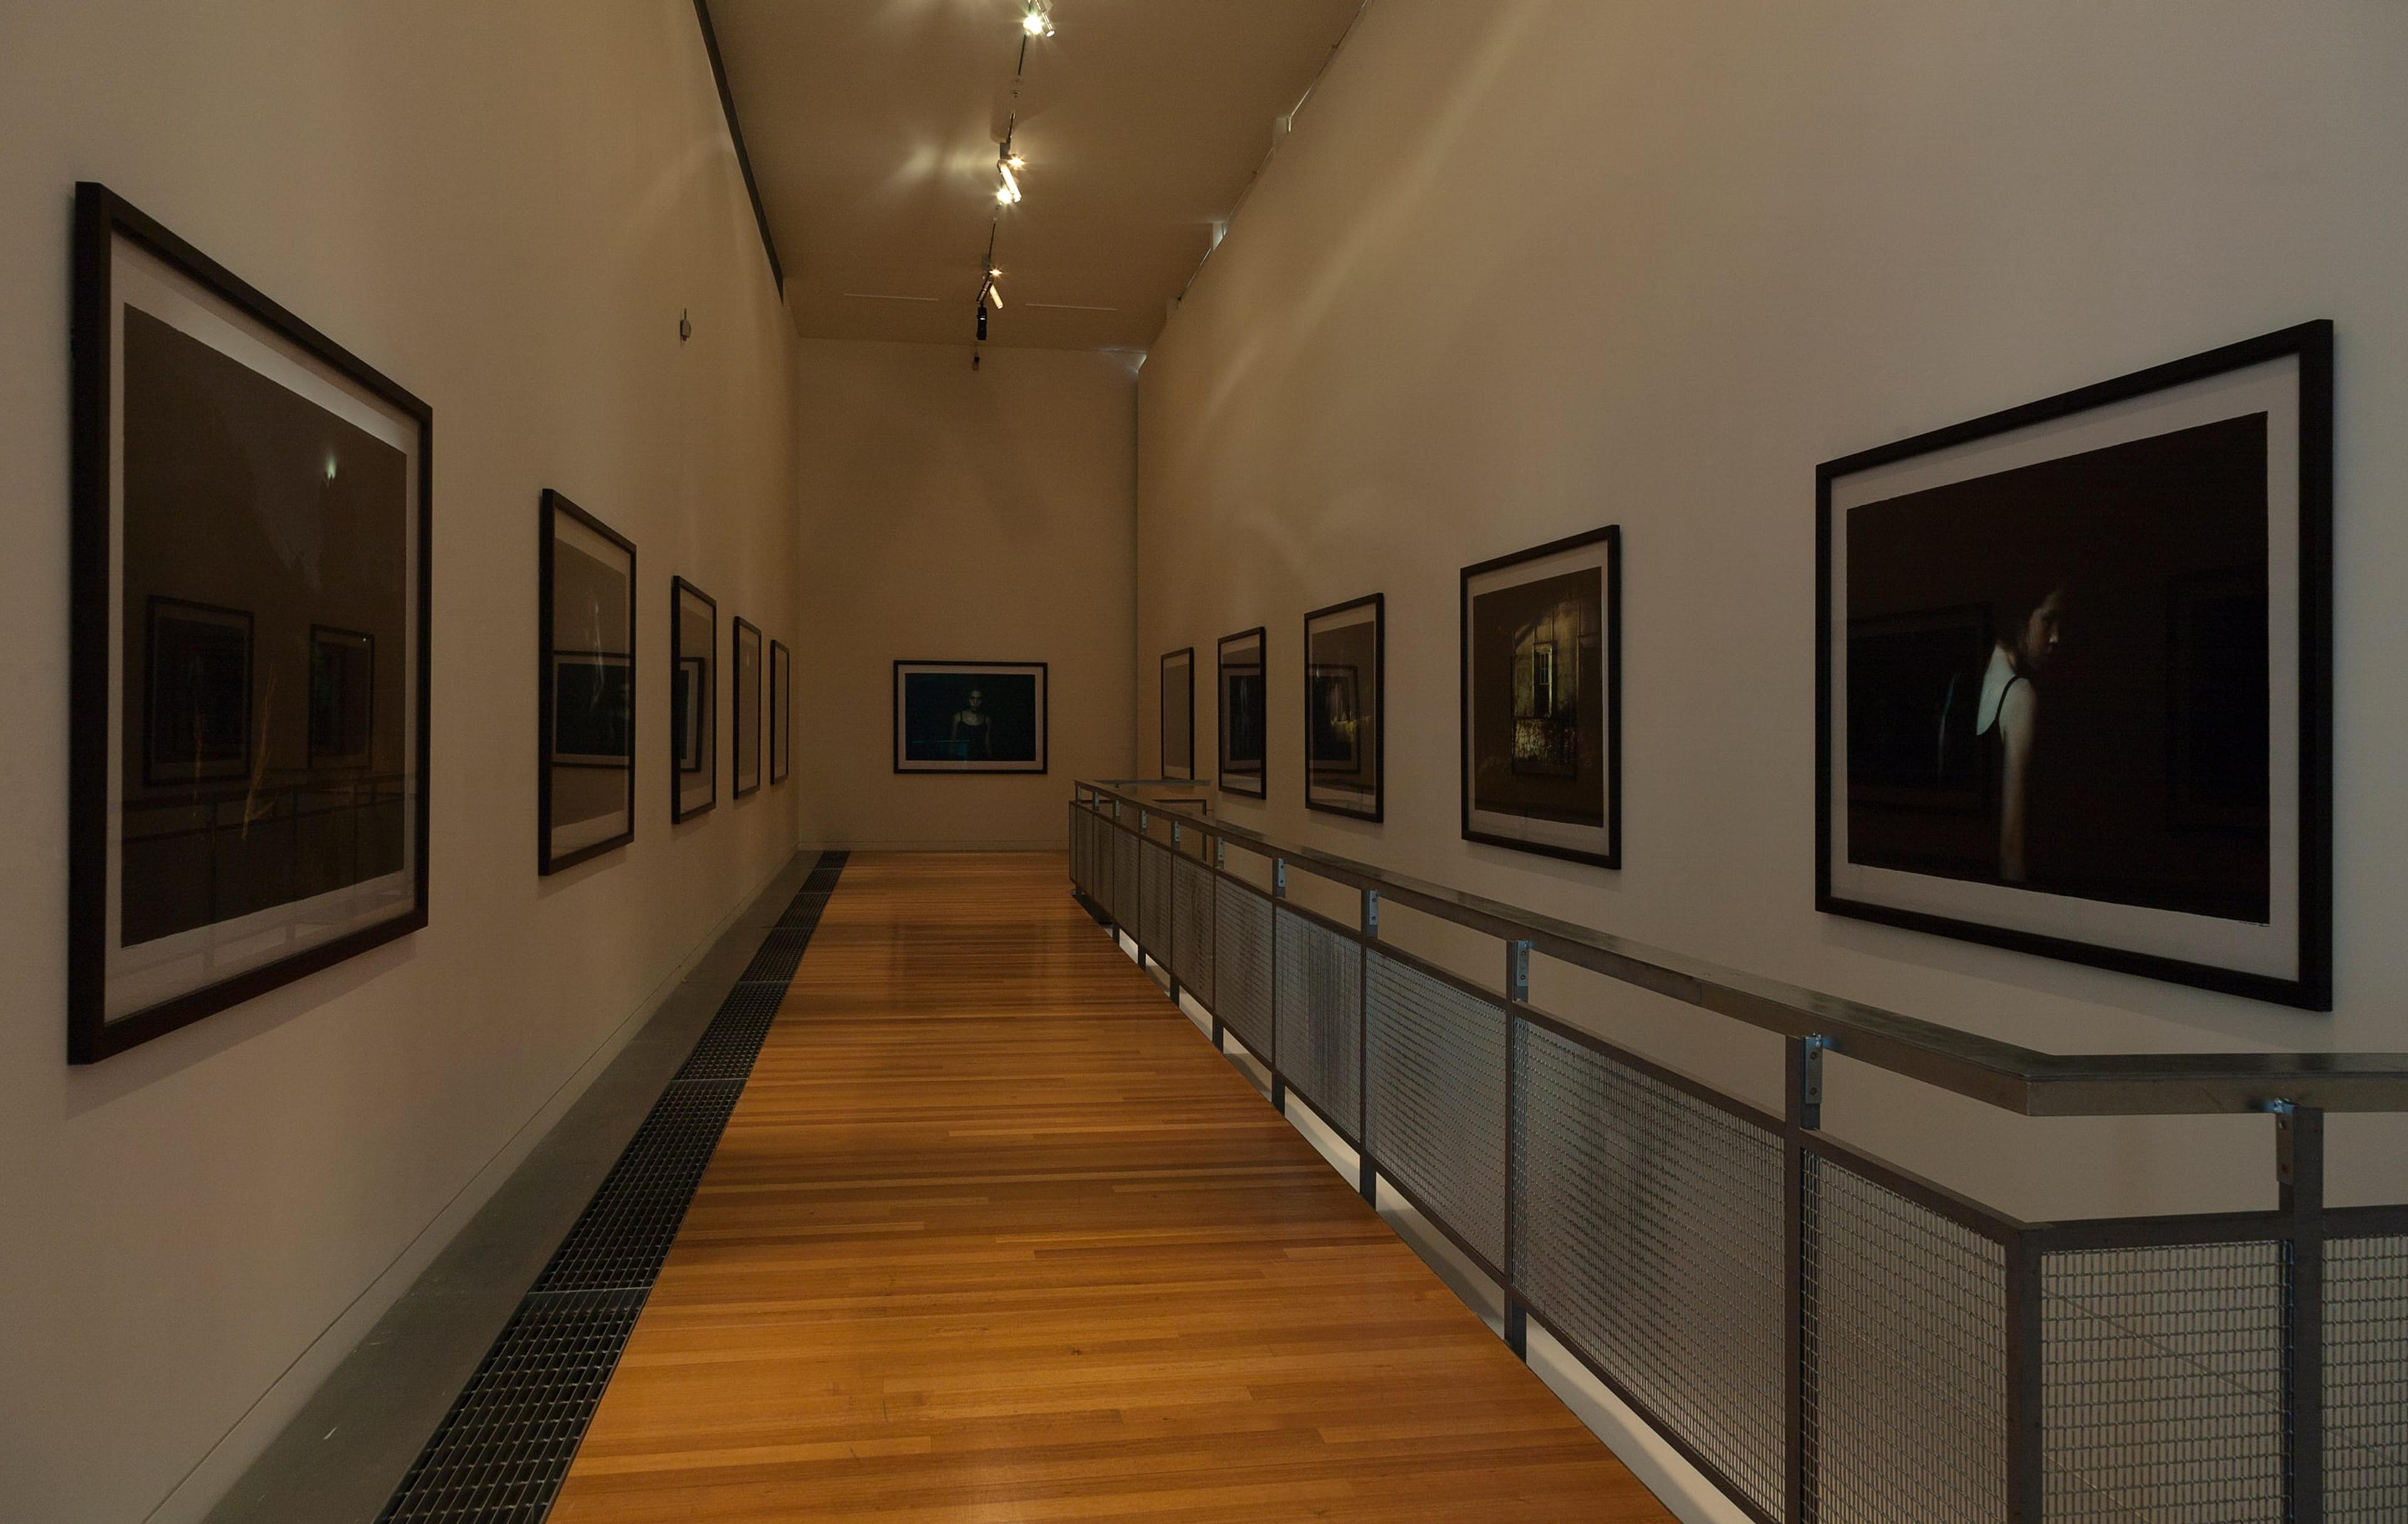 Installation view of Bill Henson, from the series Untitled 1998/1999/2000, in Beautiful Creatures: Jack Smith / Bill Henson / Jacqueline Fraser. Photo: Shaun Waugh.